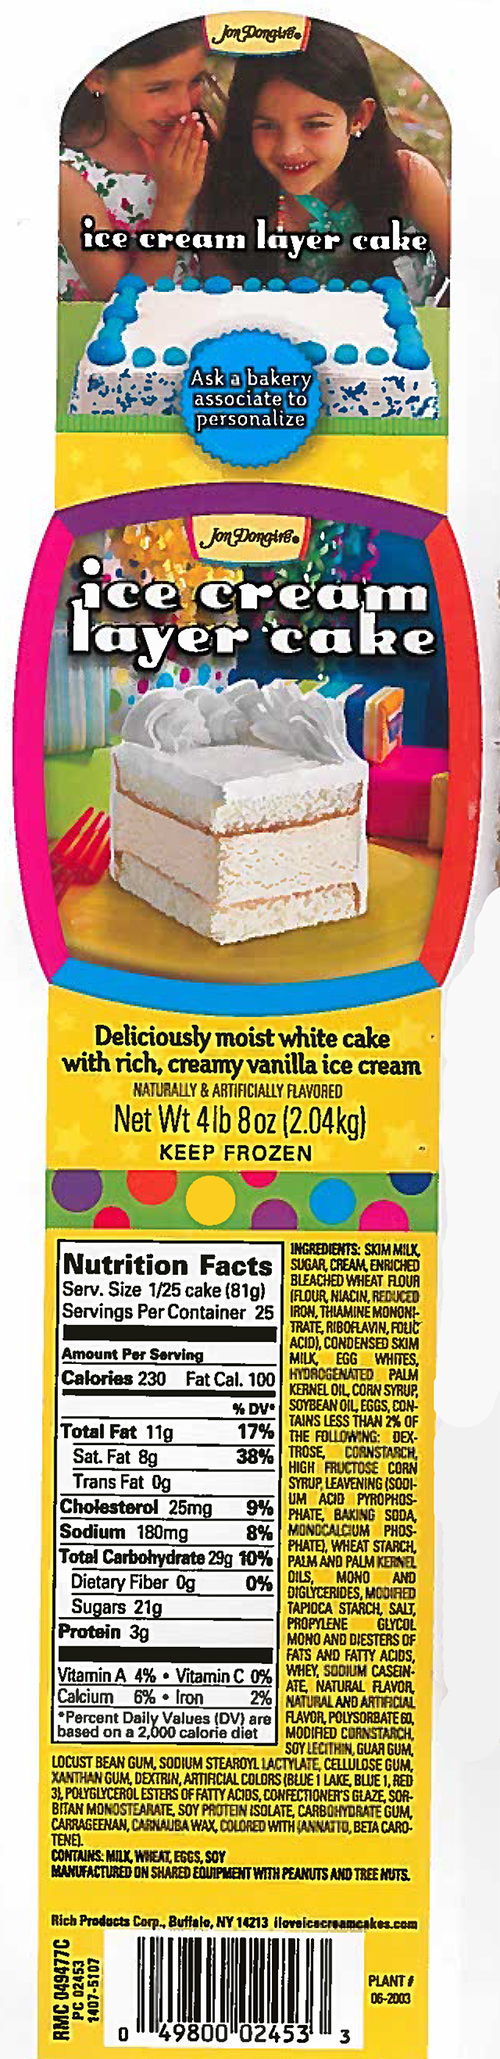 Rich Products Corporation Issues Nationwide Allergy Alert on Undeclared Walnuts in Certain Ice Cream Cake Products